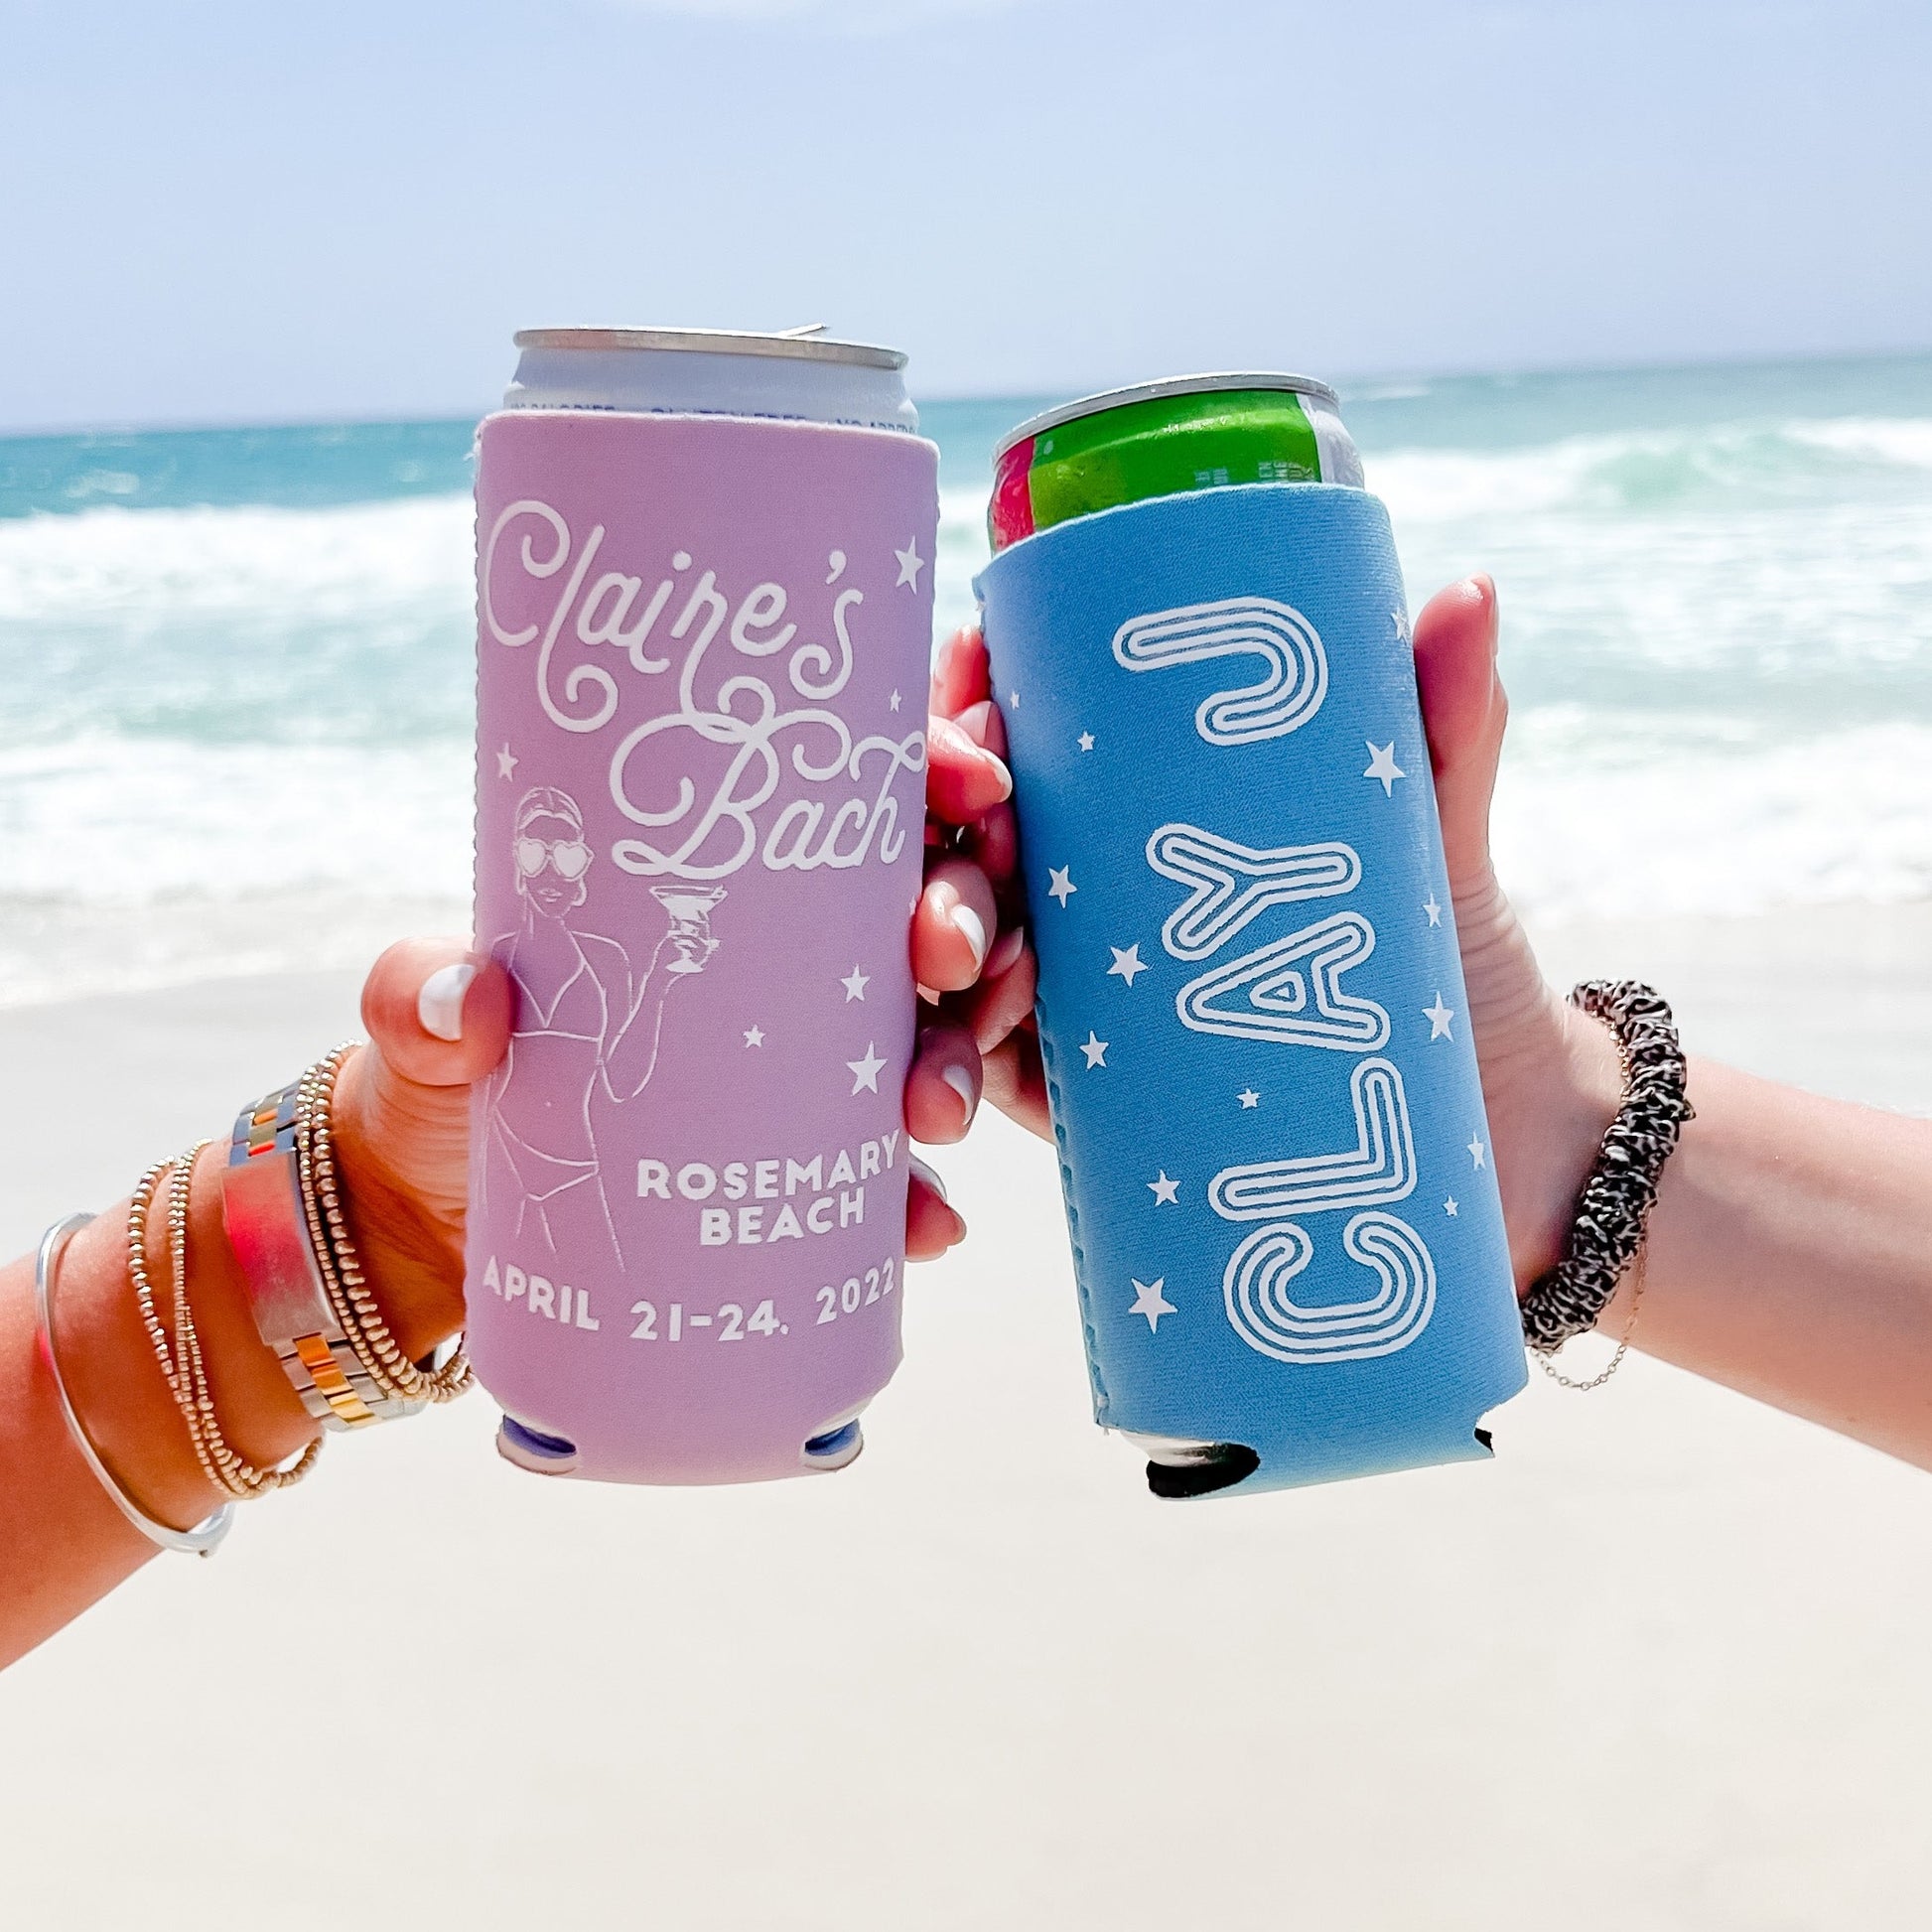 Custom Full Color Neoprene Collapsible Can Coolers